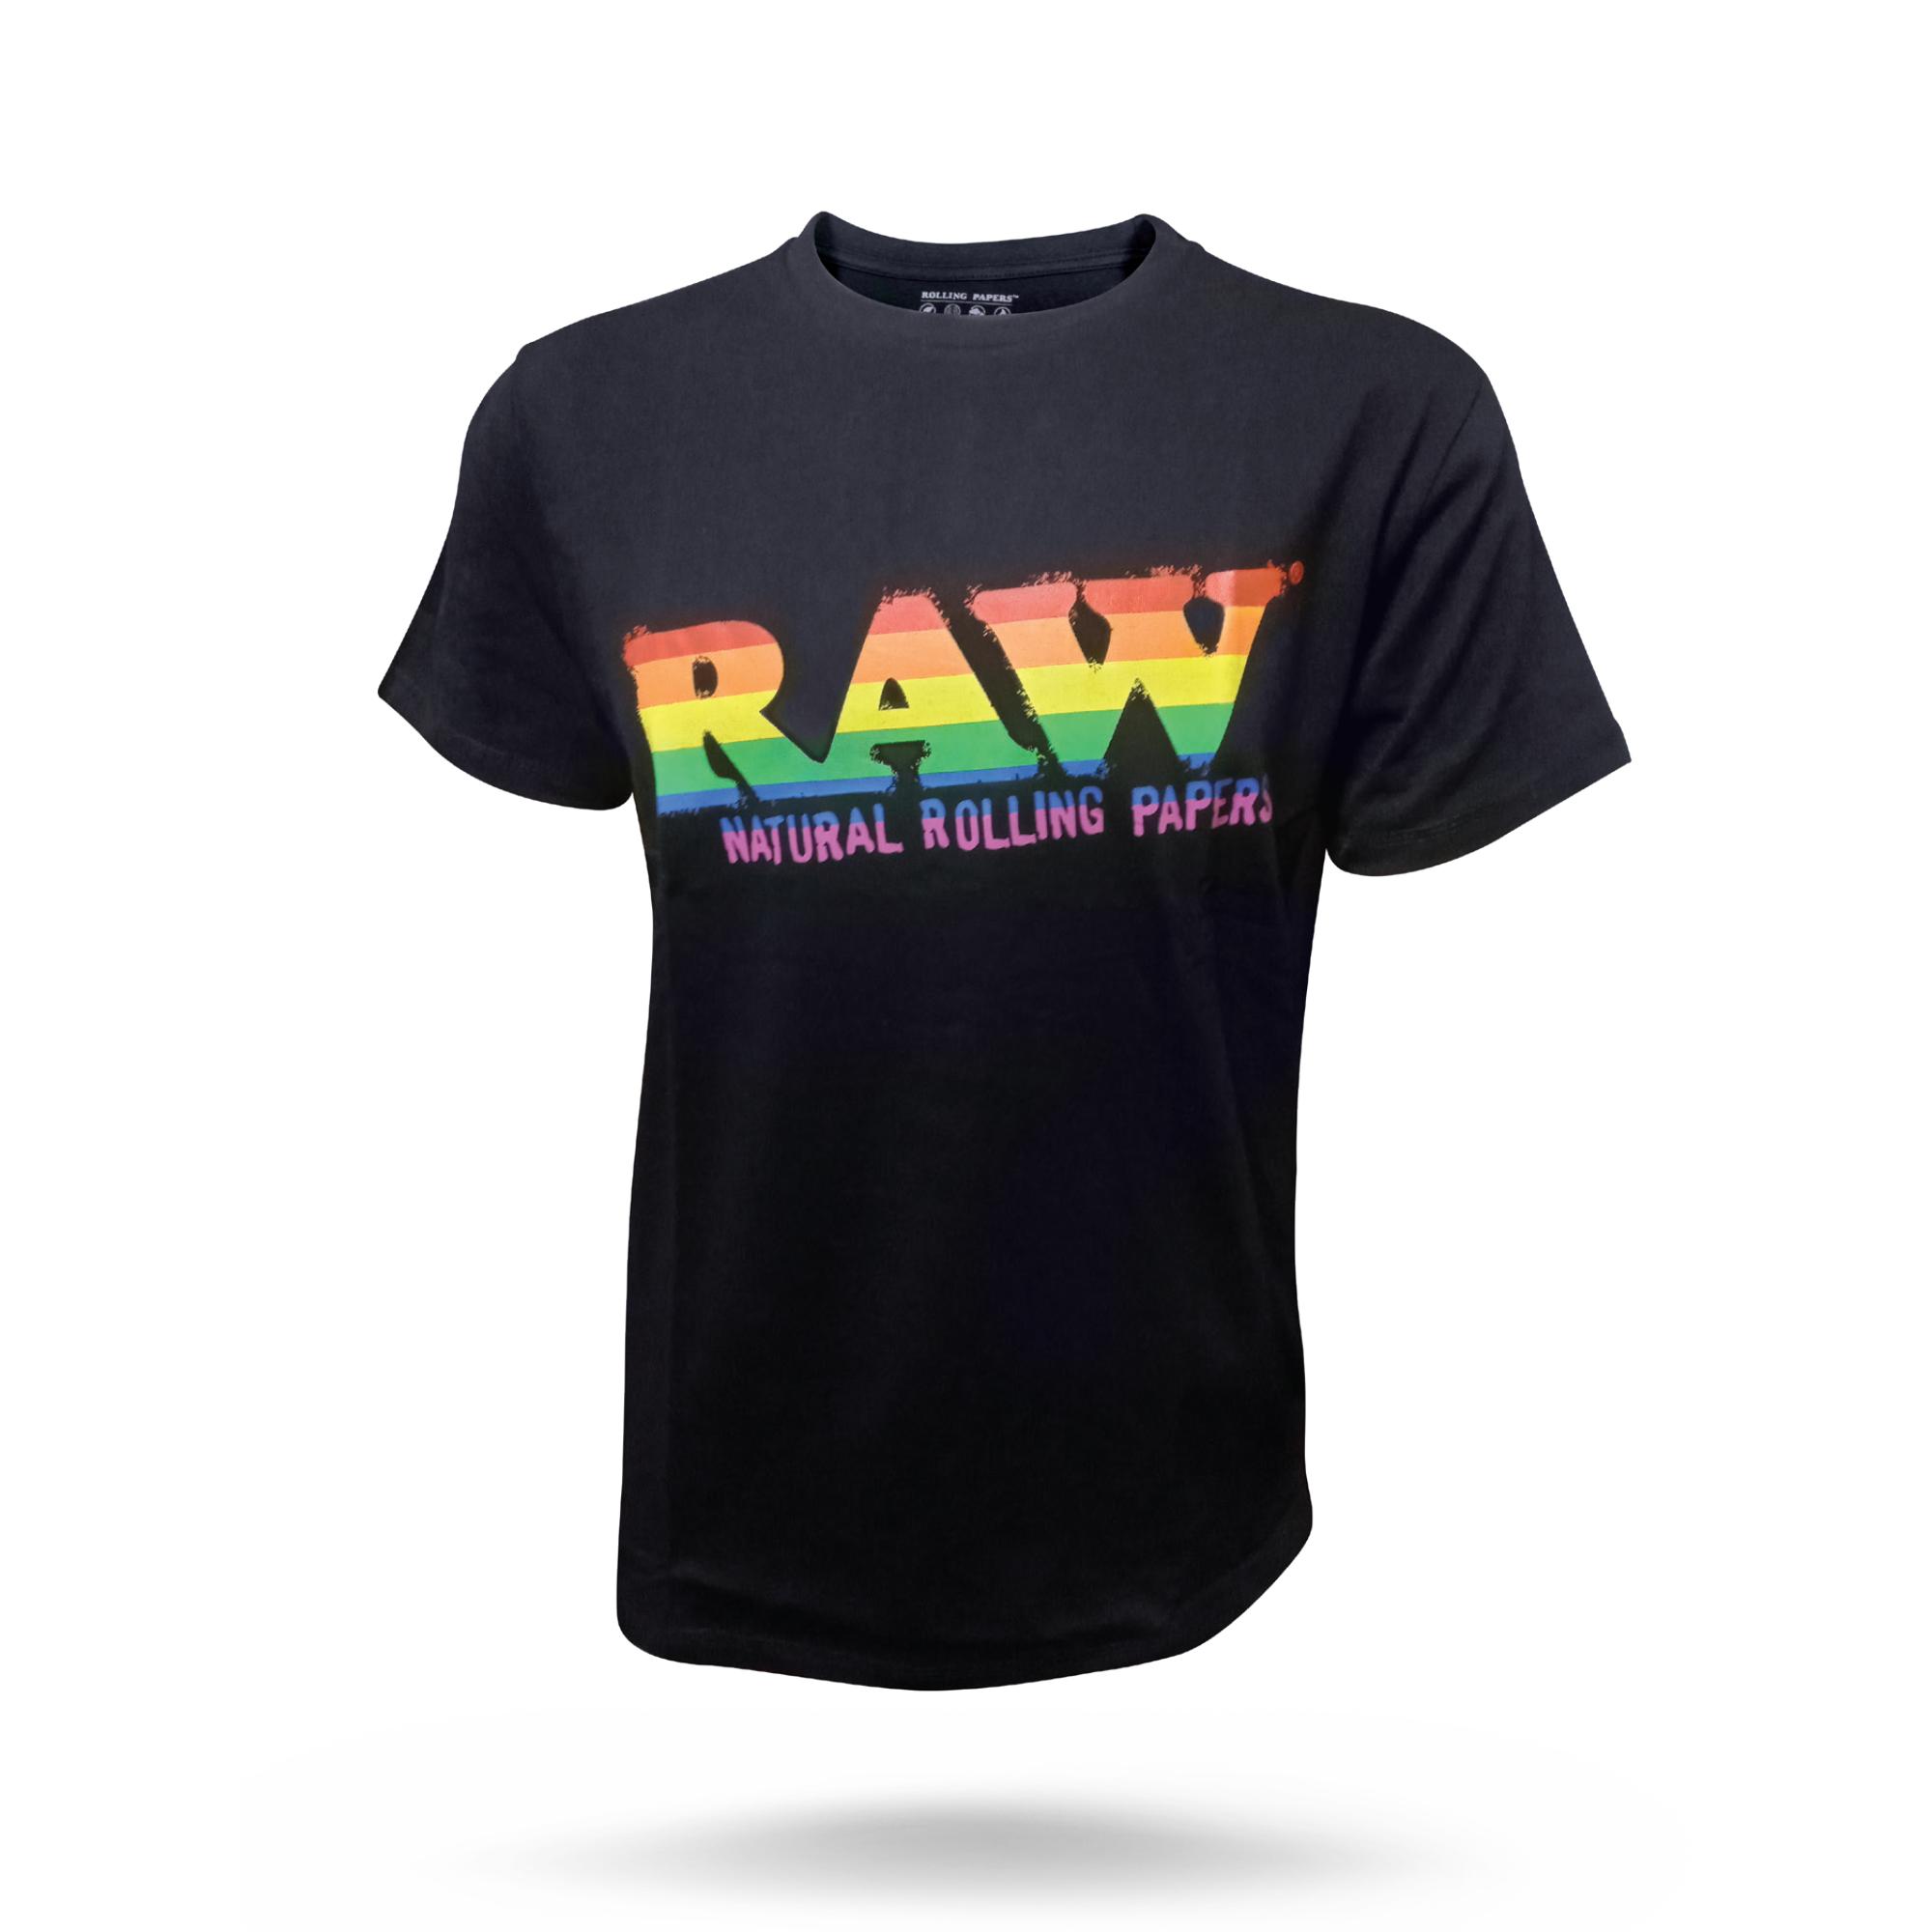 RAW Logo T-Shirt | Pride Clothing Accessories esd-official